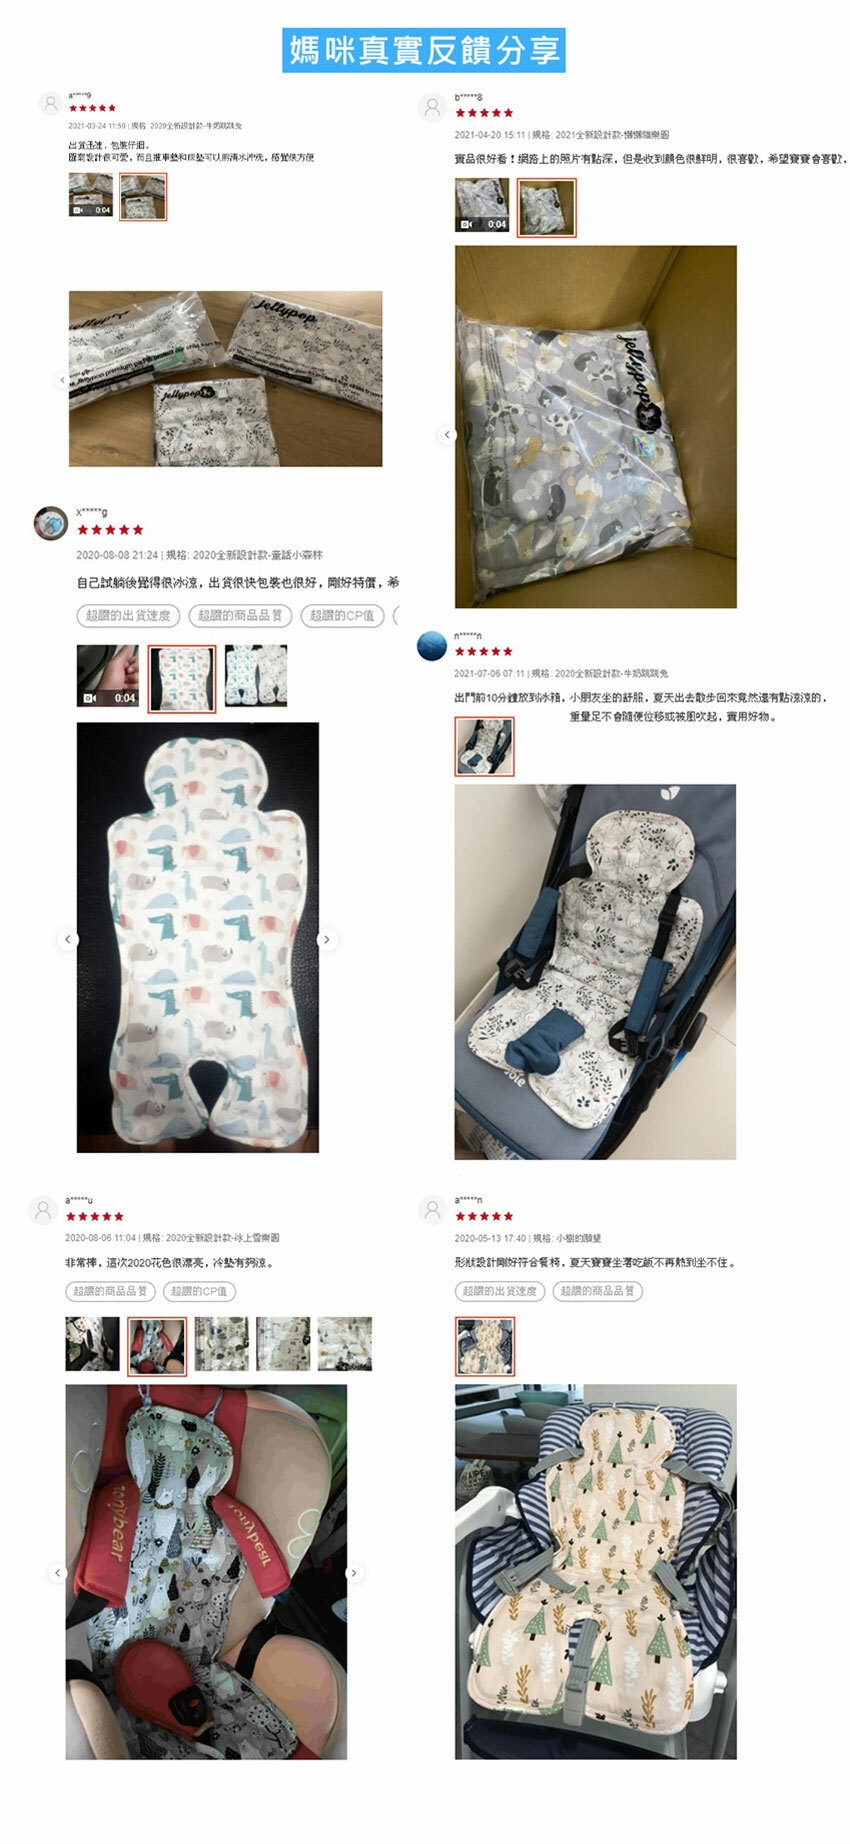 [Korea Jellypop] Jellyseat exclusive ice beads patented long-lasting cooling stroller seat cushion - Ocean Whale Spirit